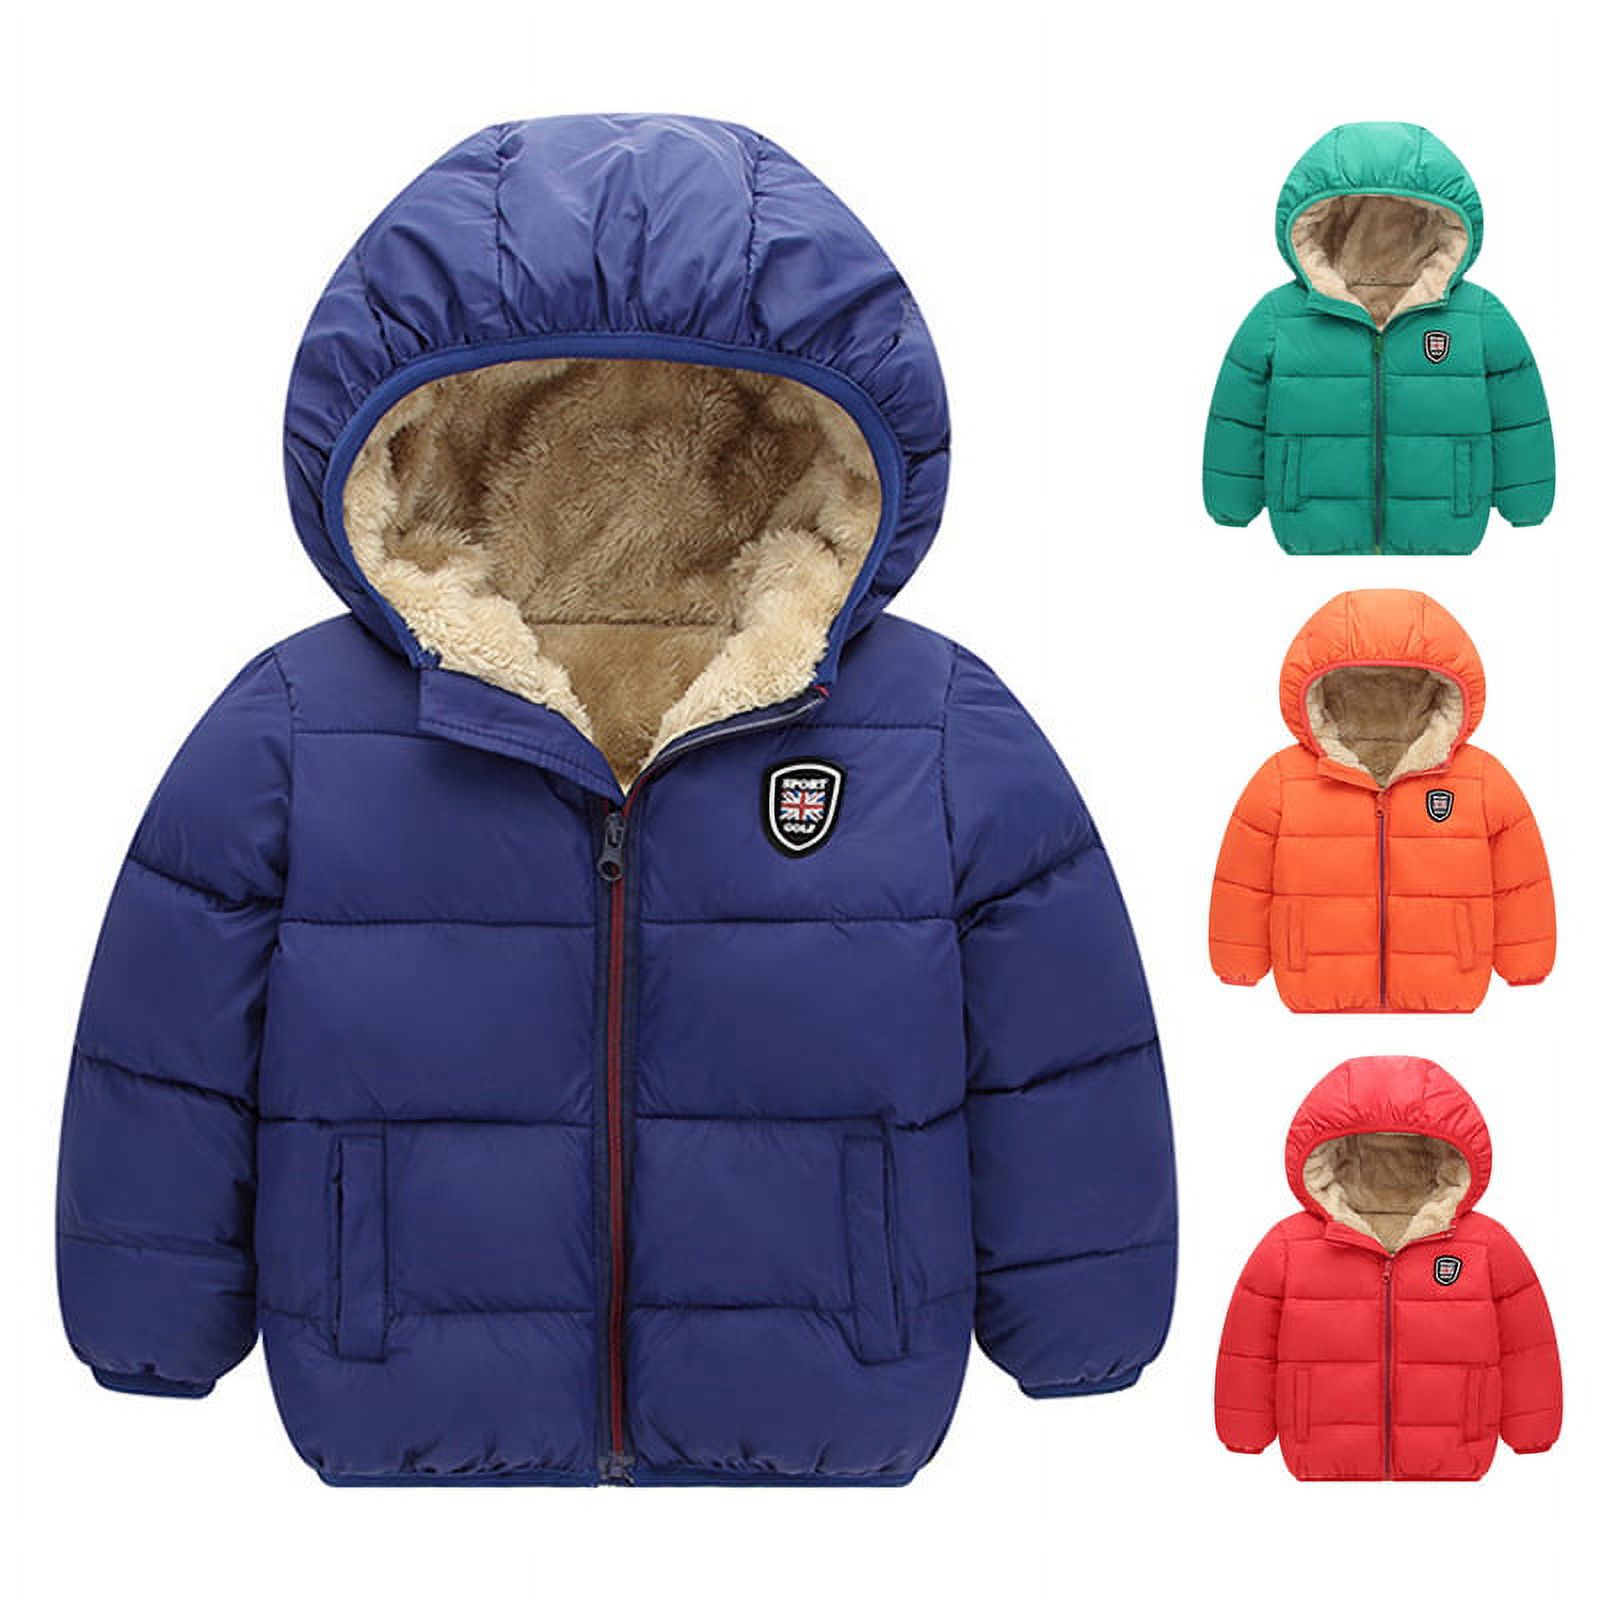 Winter Children Kid's Boy Girl Warm Hooded Jacket Coat Cotton-padded Jacket Parka Overcoat Thick Down Coat for 2-7T - image 2 of 7